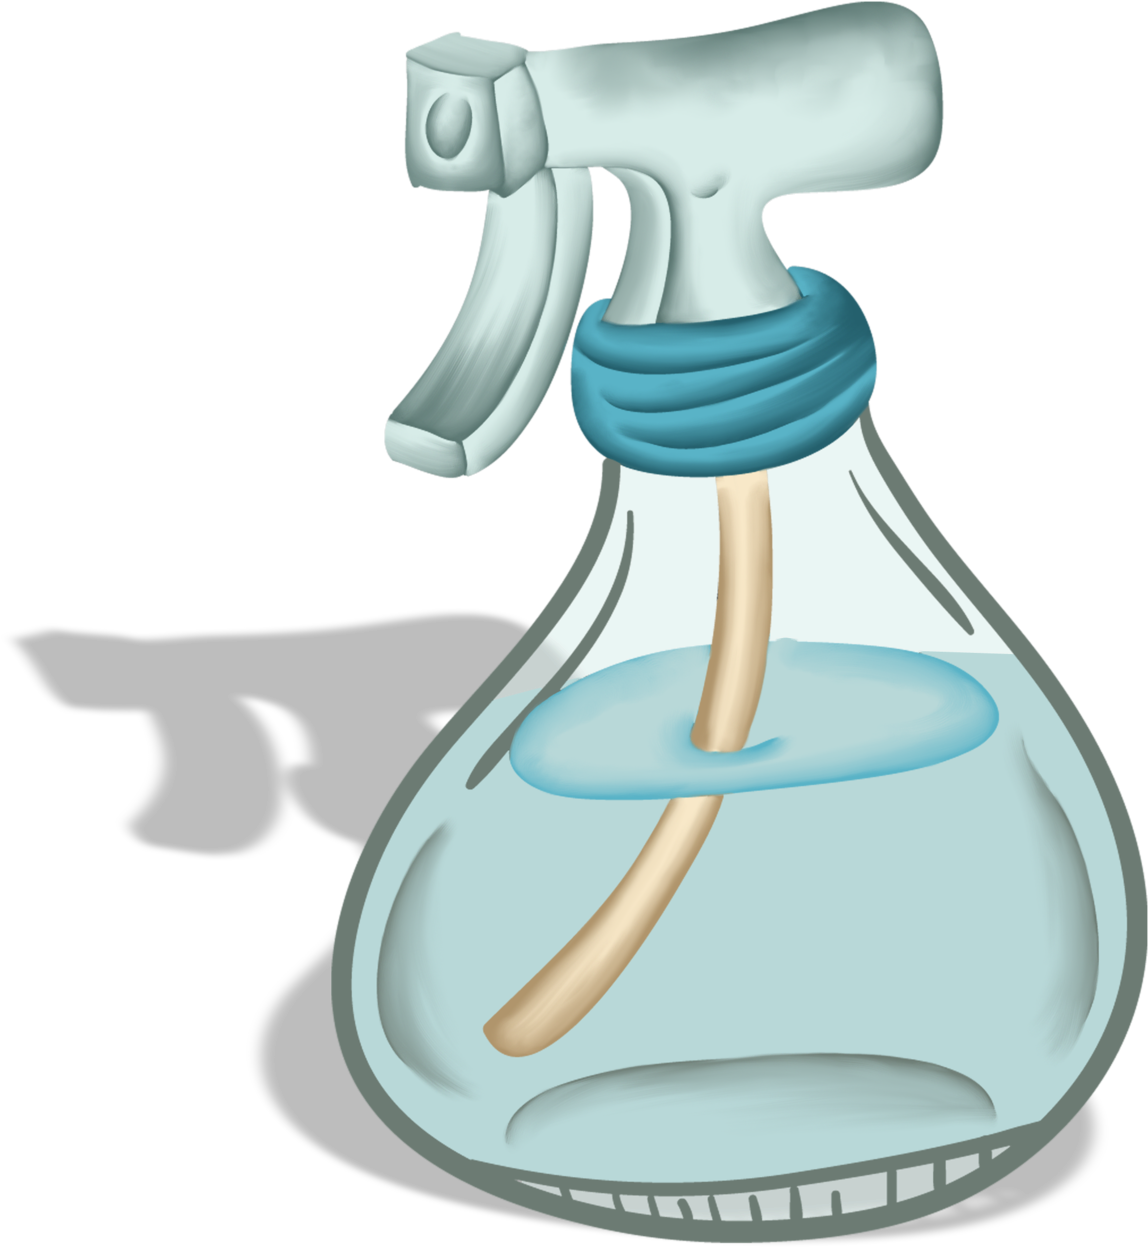 Spray Bottle Clipart - Water Spray Bottle Clipart - Png Download - Large Si...